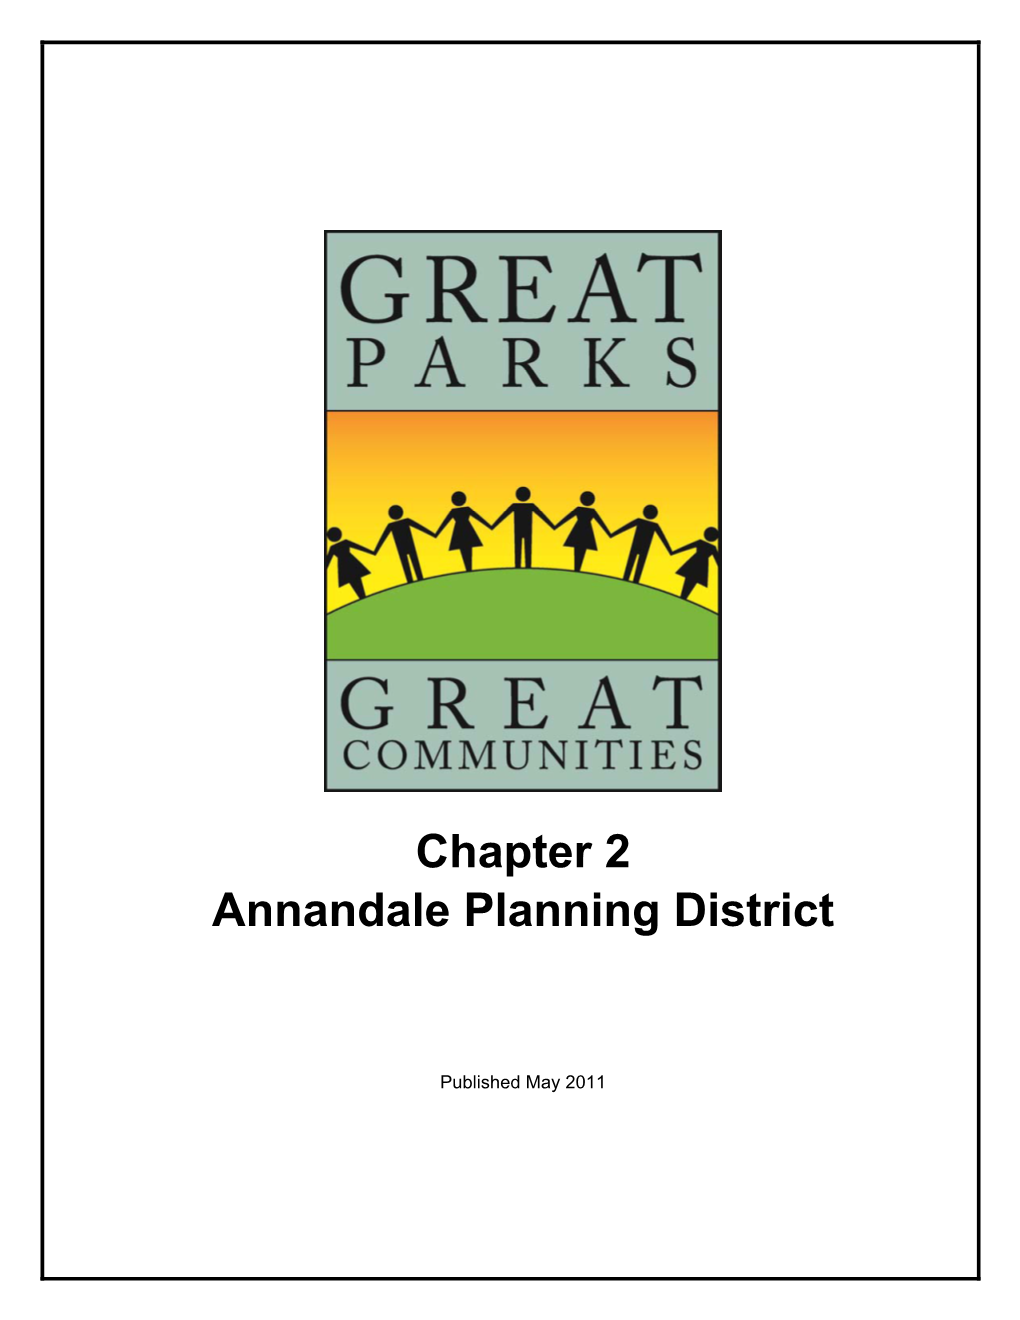 Annandale Planning District